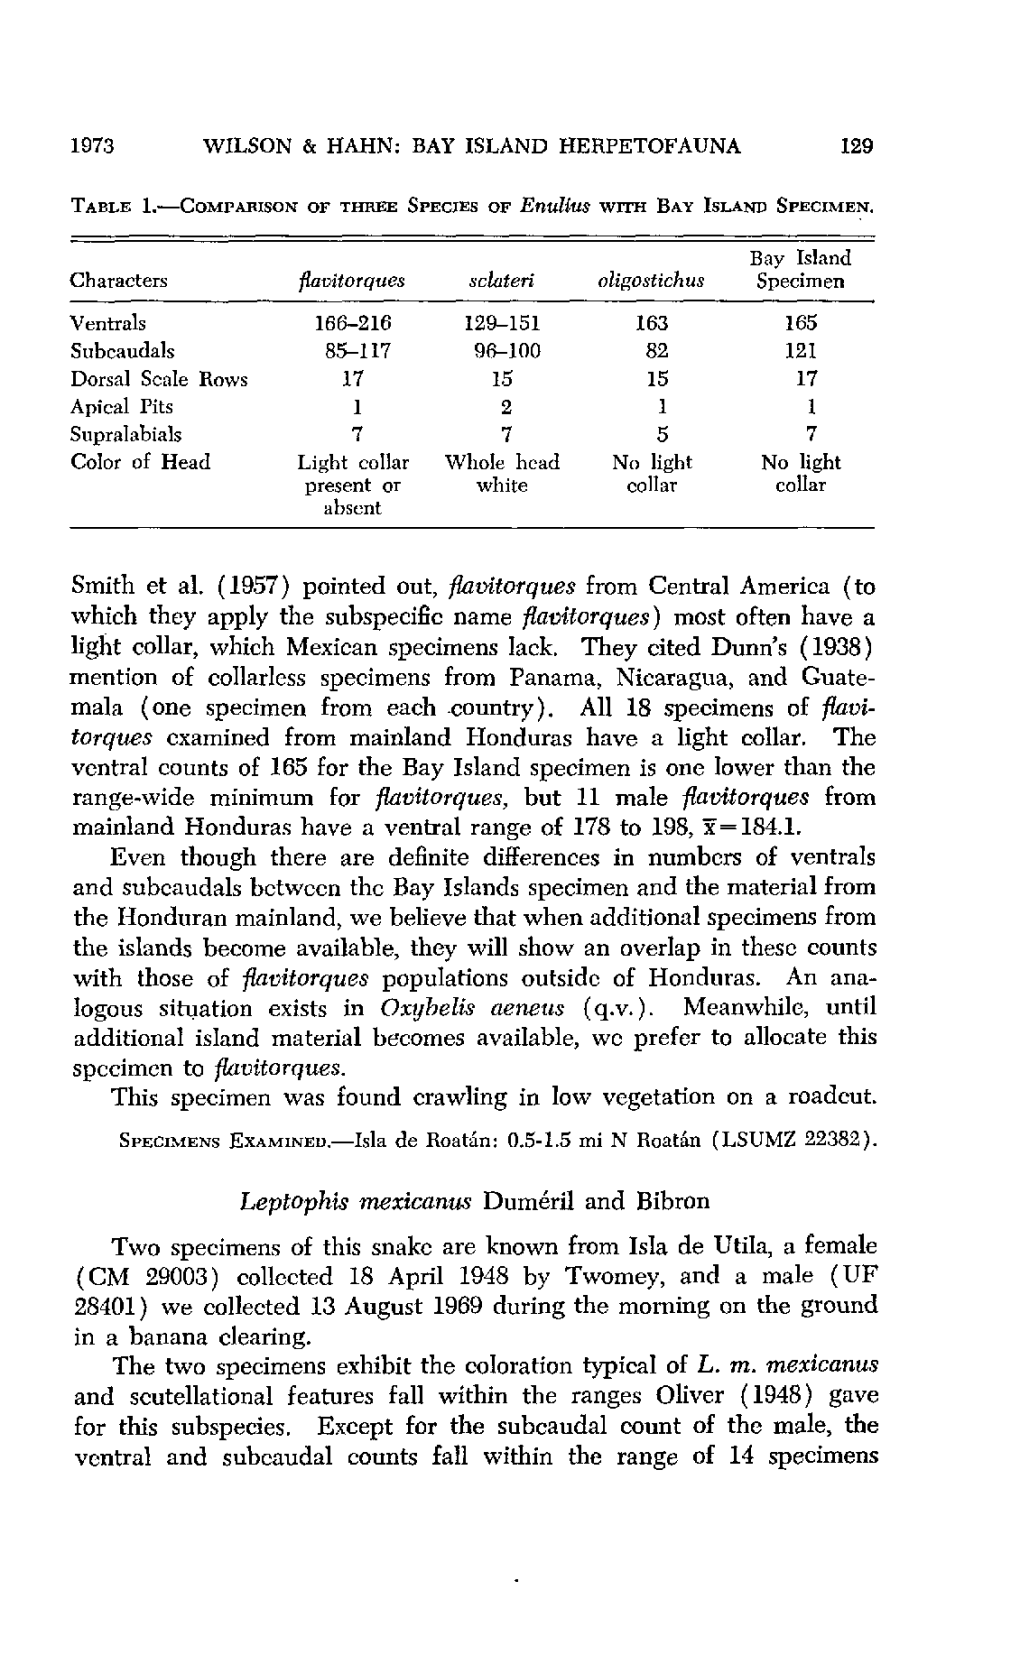 Smith Et Al. (1957) Pointed Out, Flavitorques from Central America